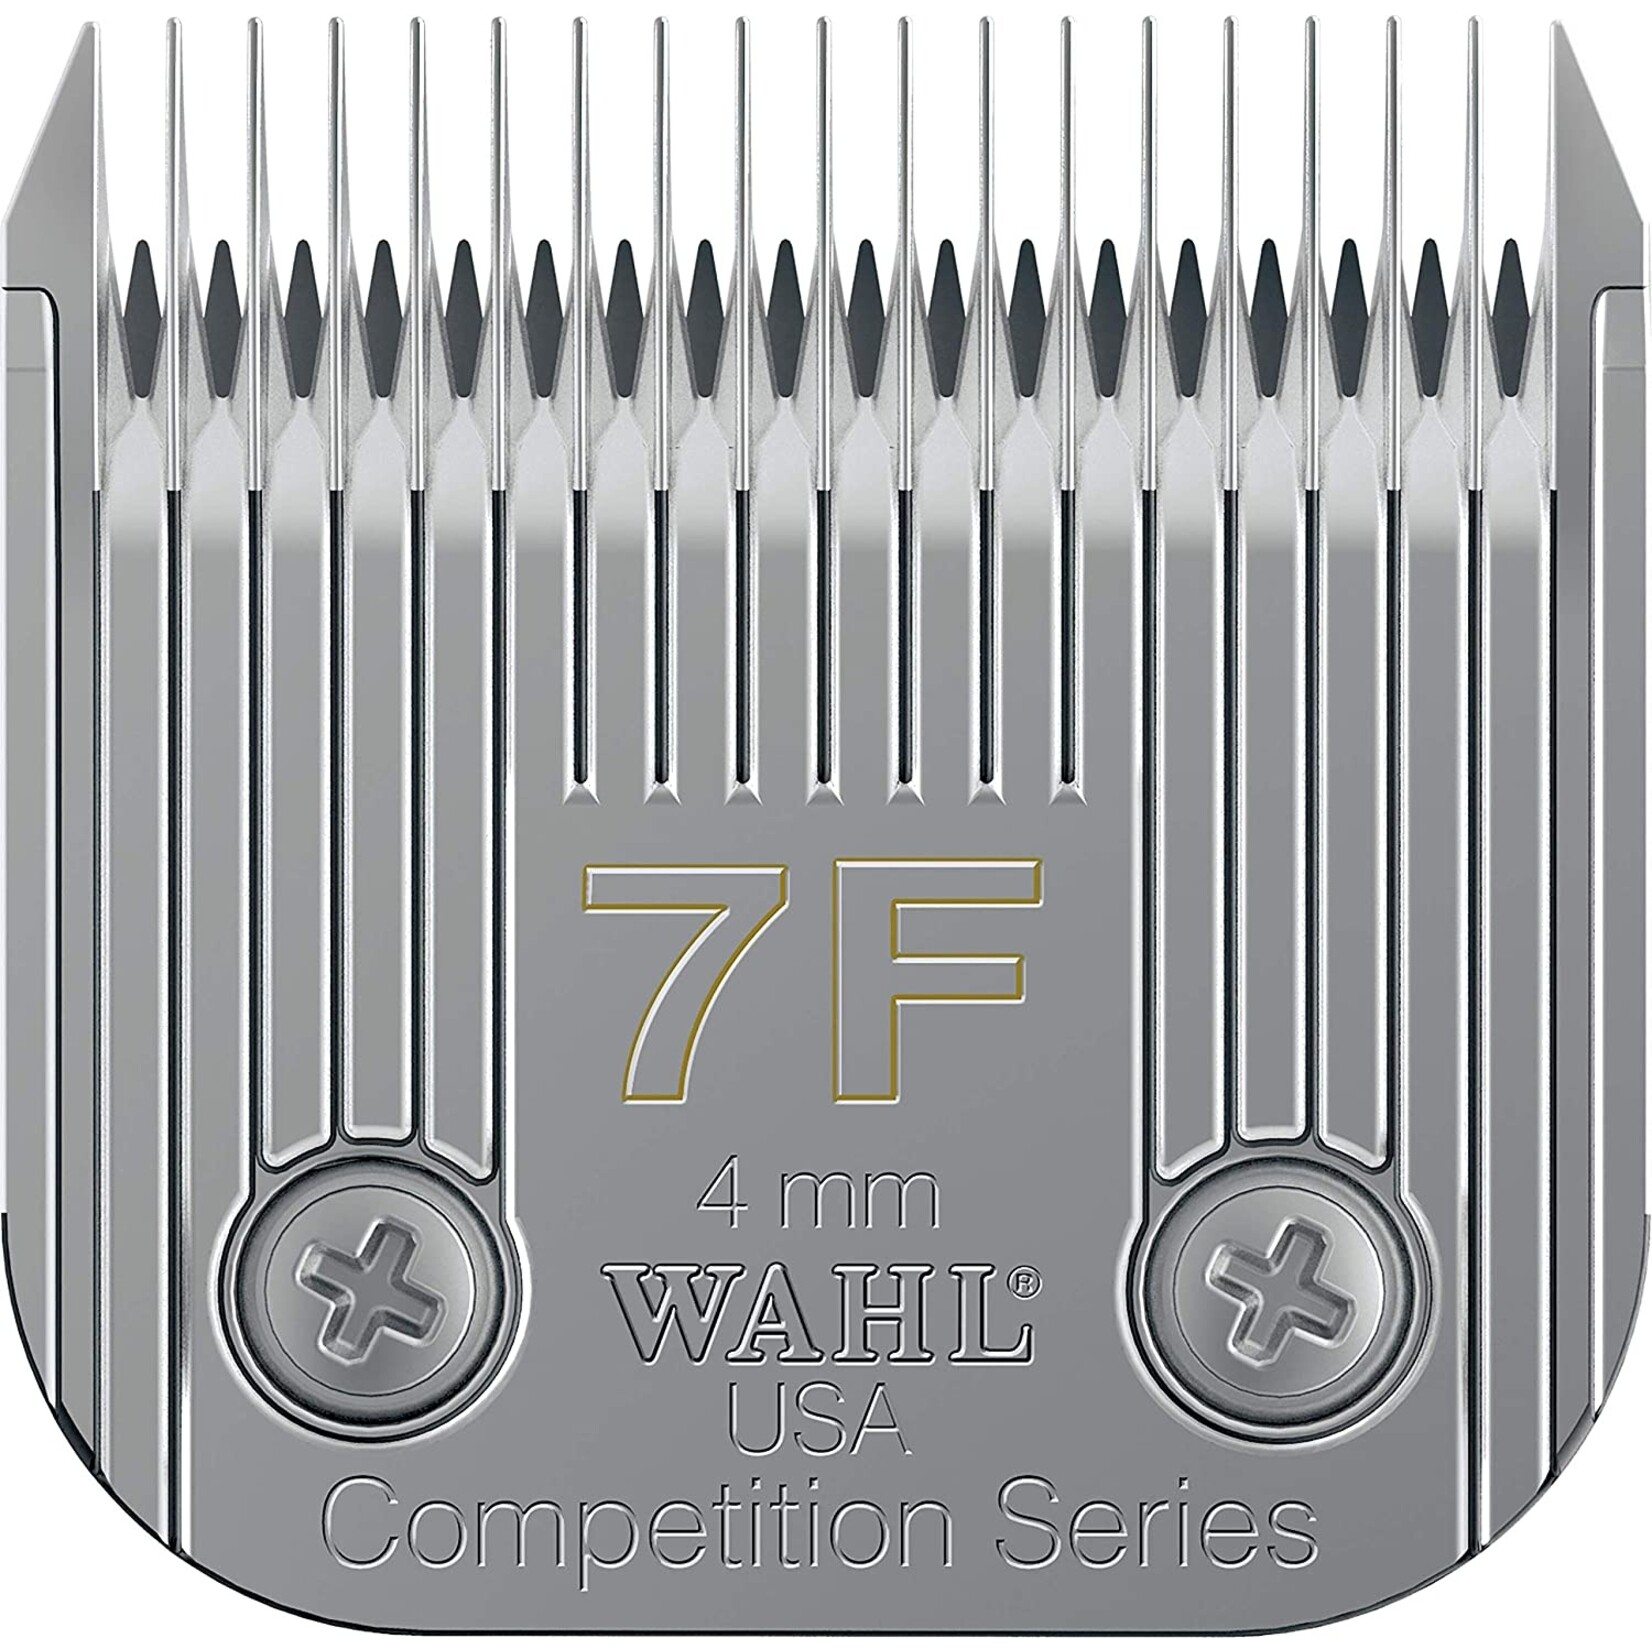 WAHL Lame 7F Competition Series